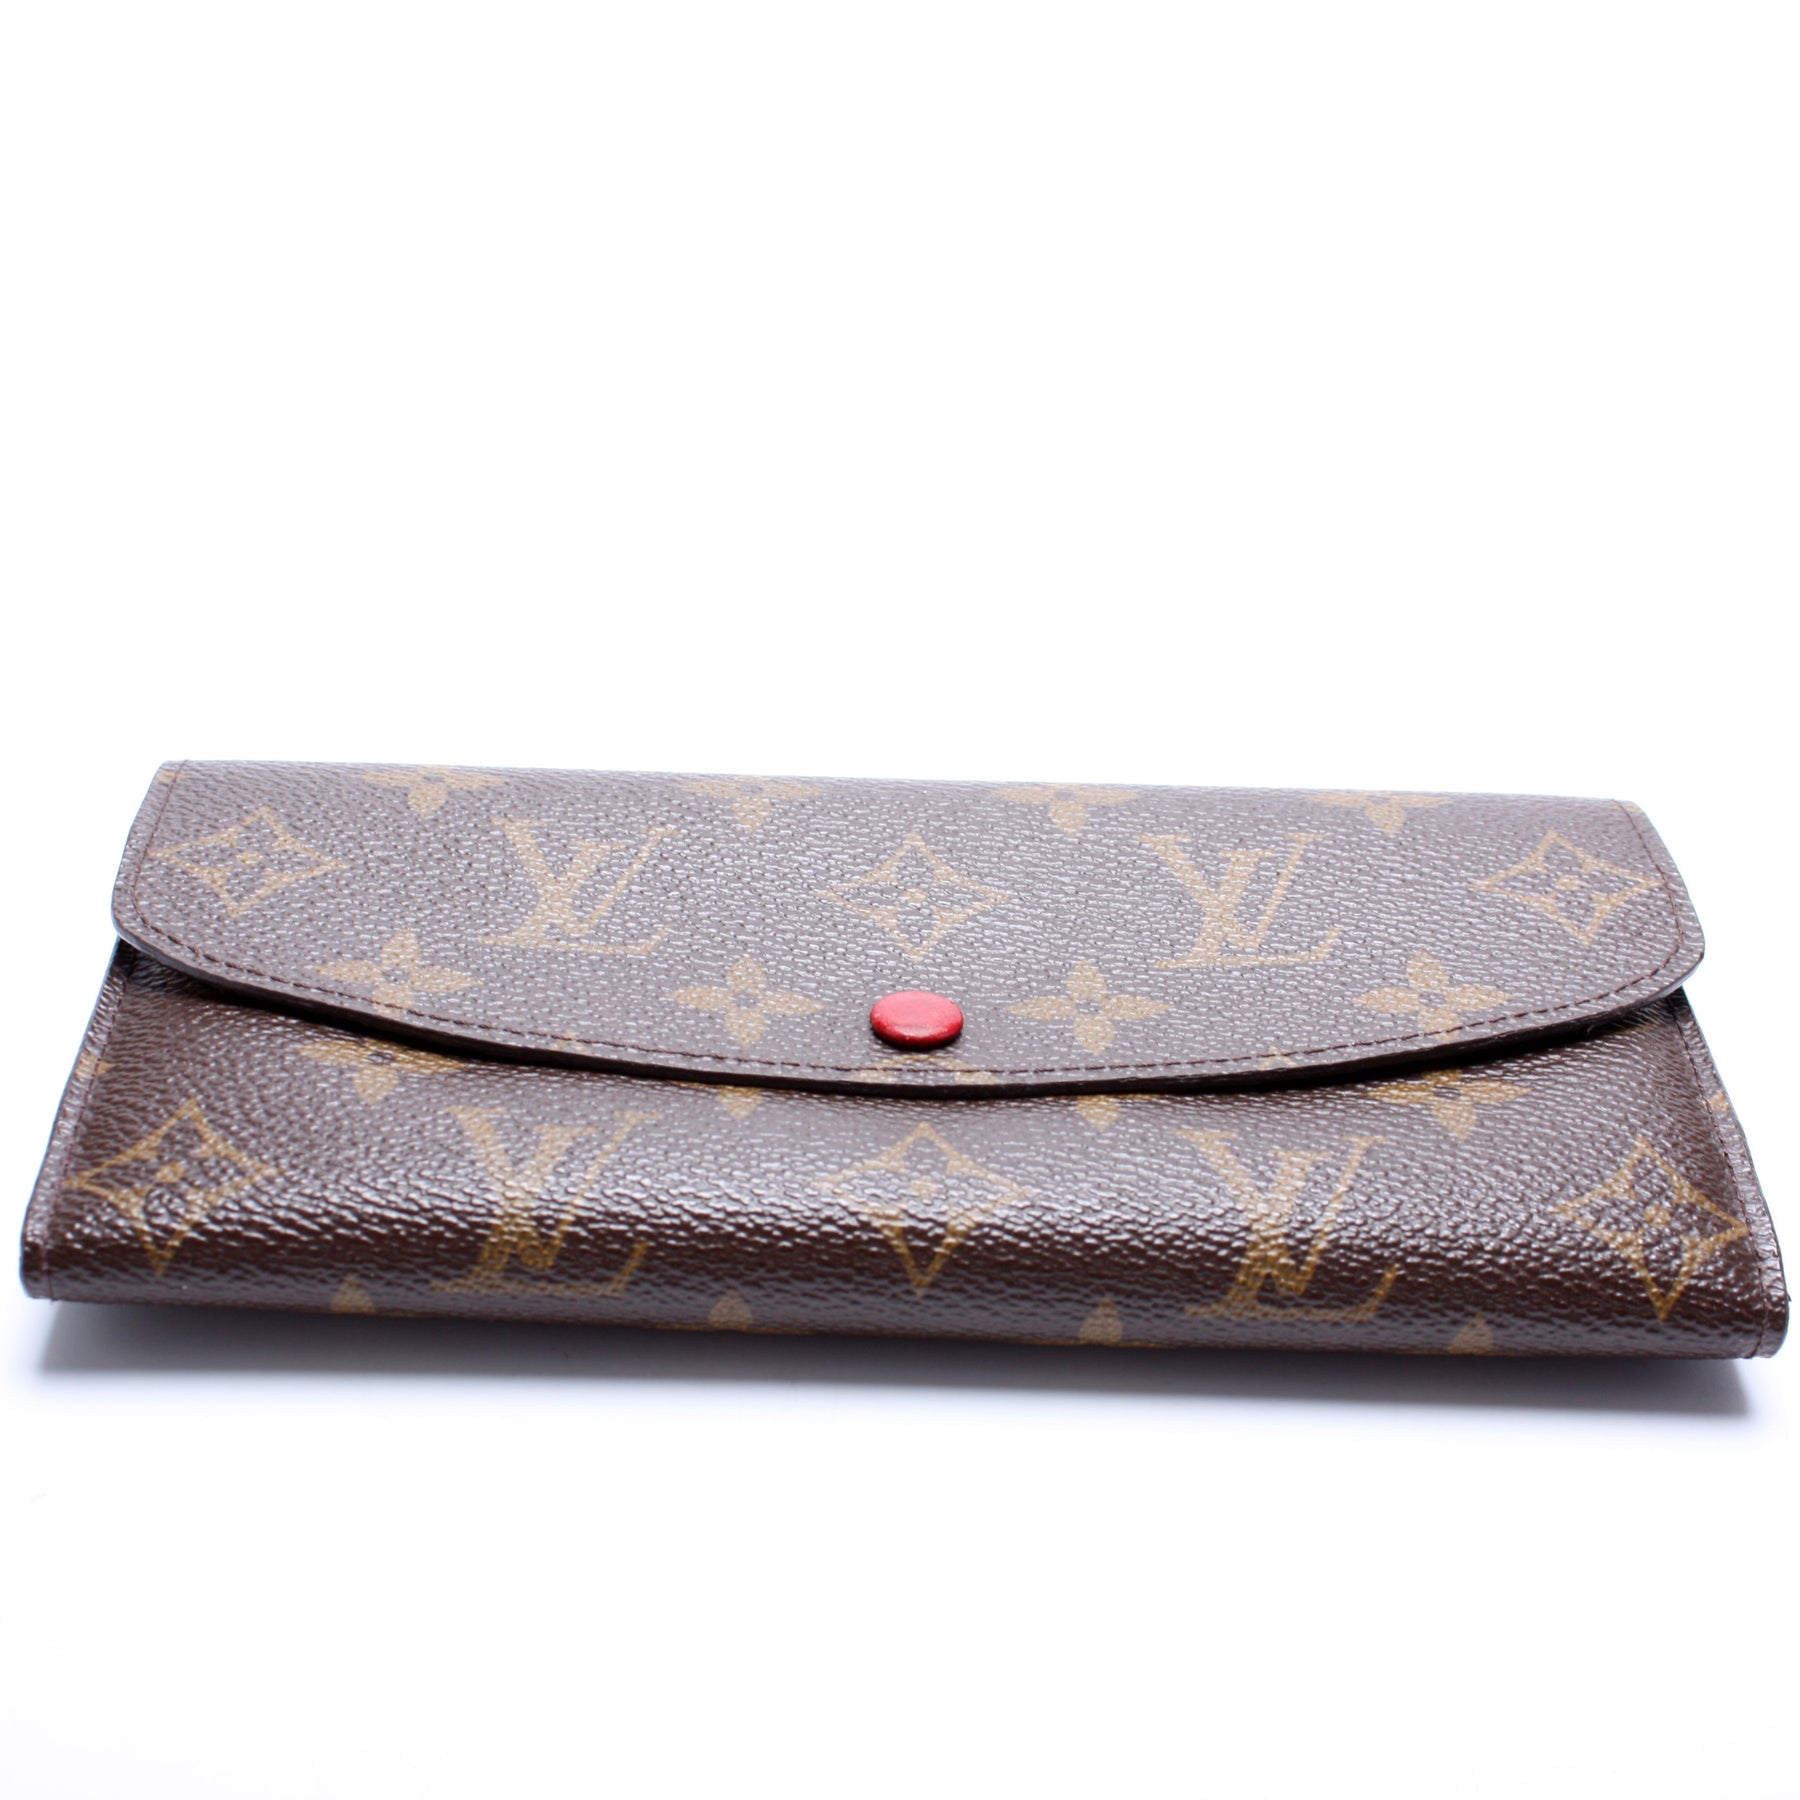 NWT Louis Vuitton Emilie Wallet, Monogram and Light Pink Coated